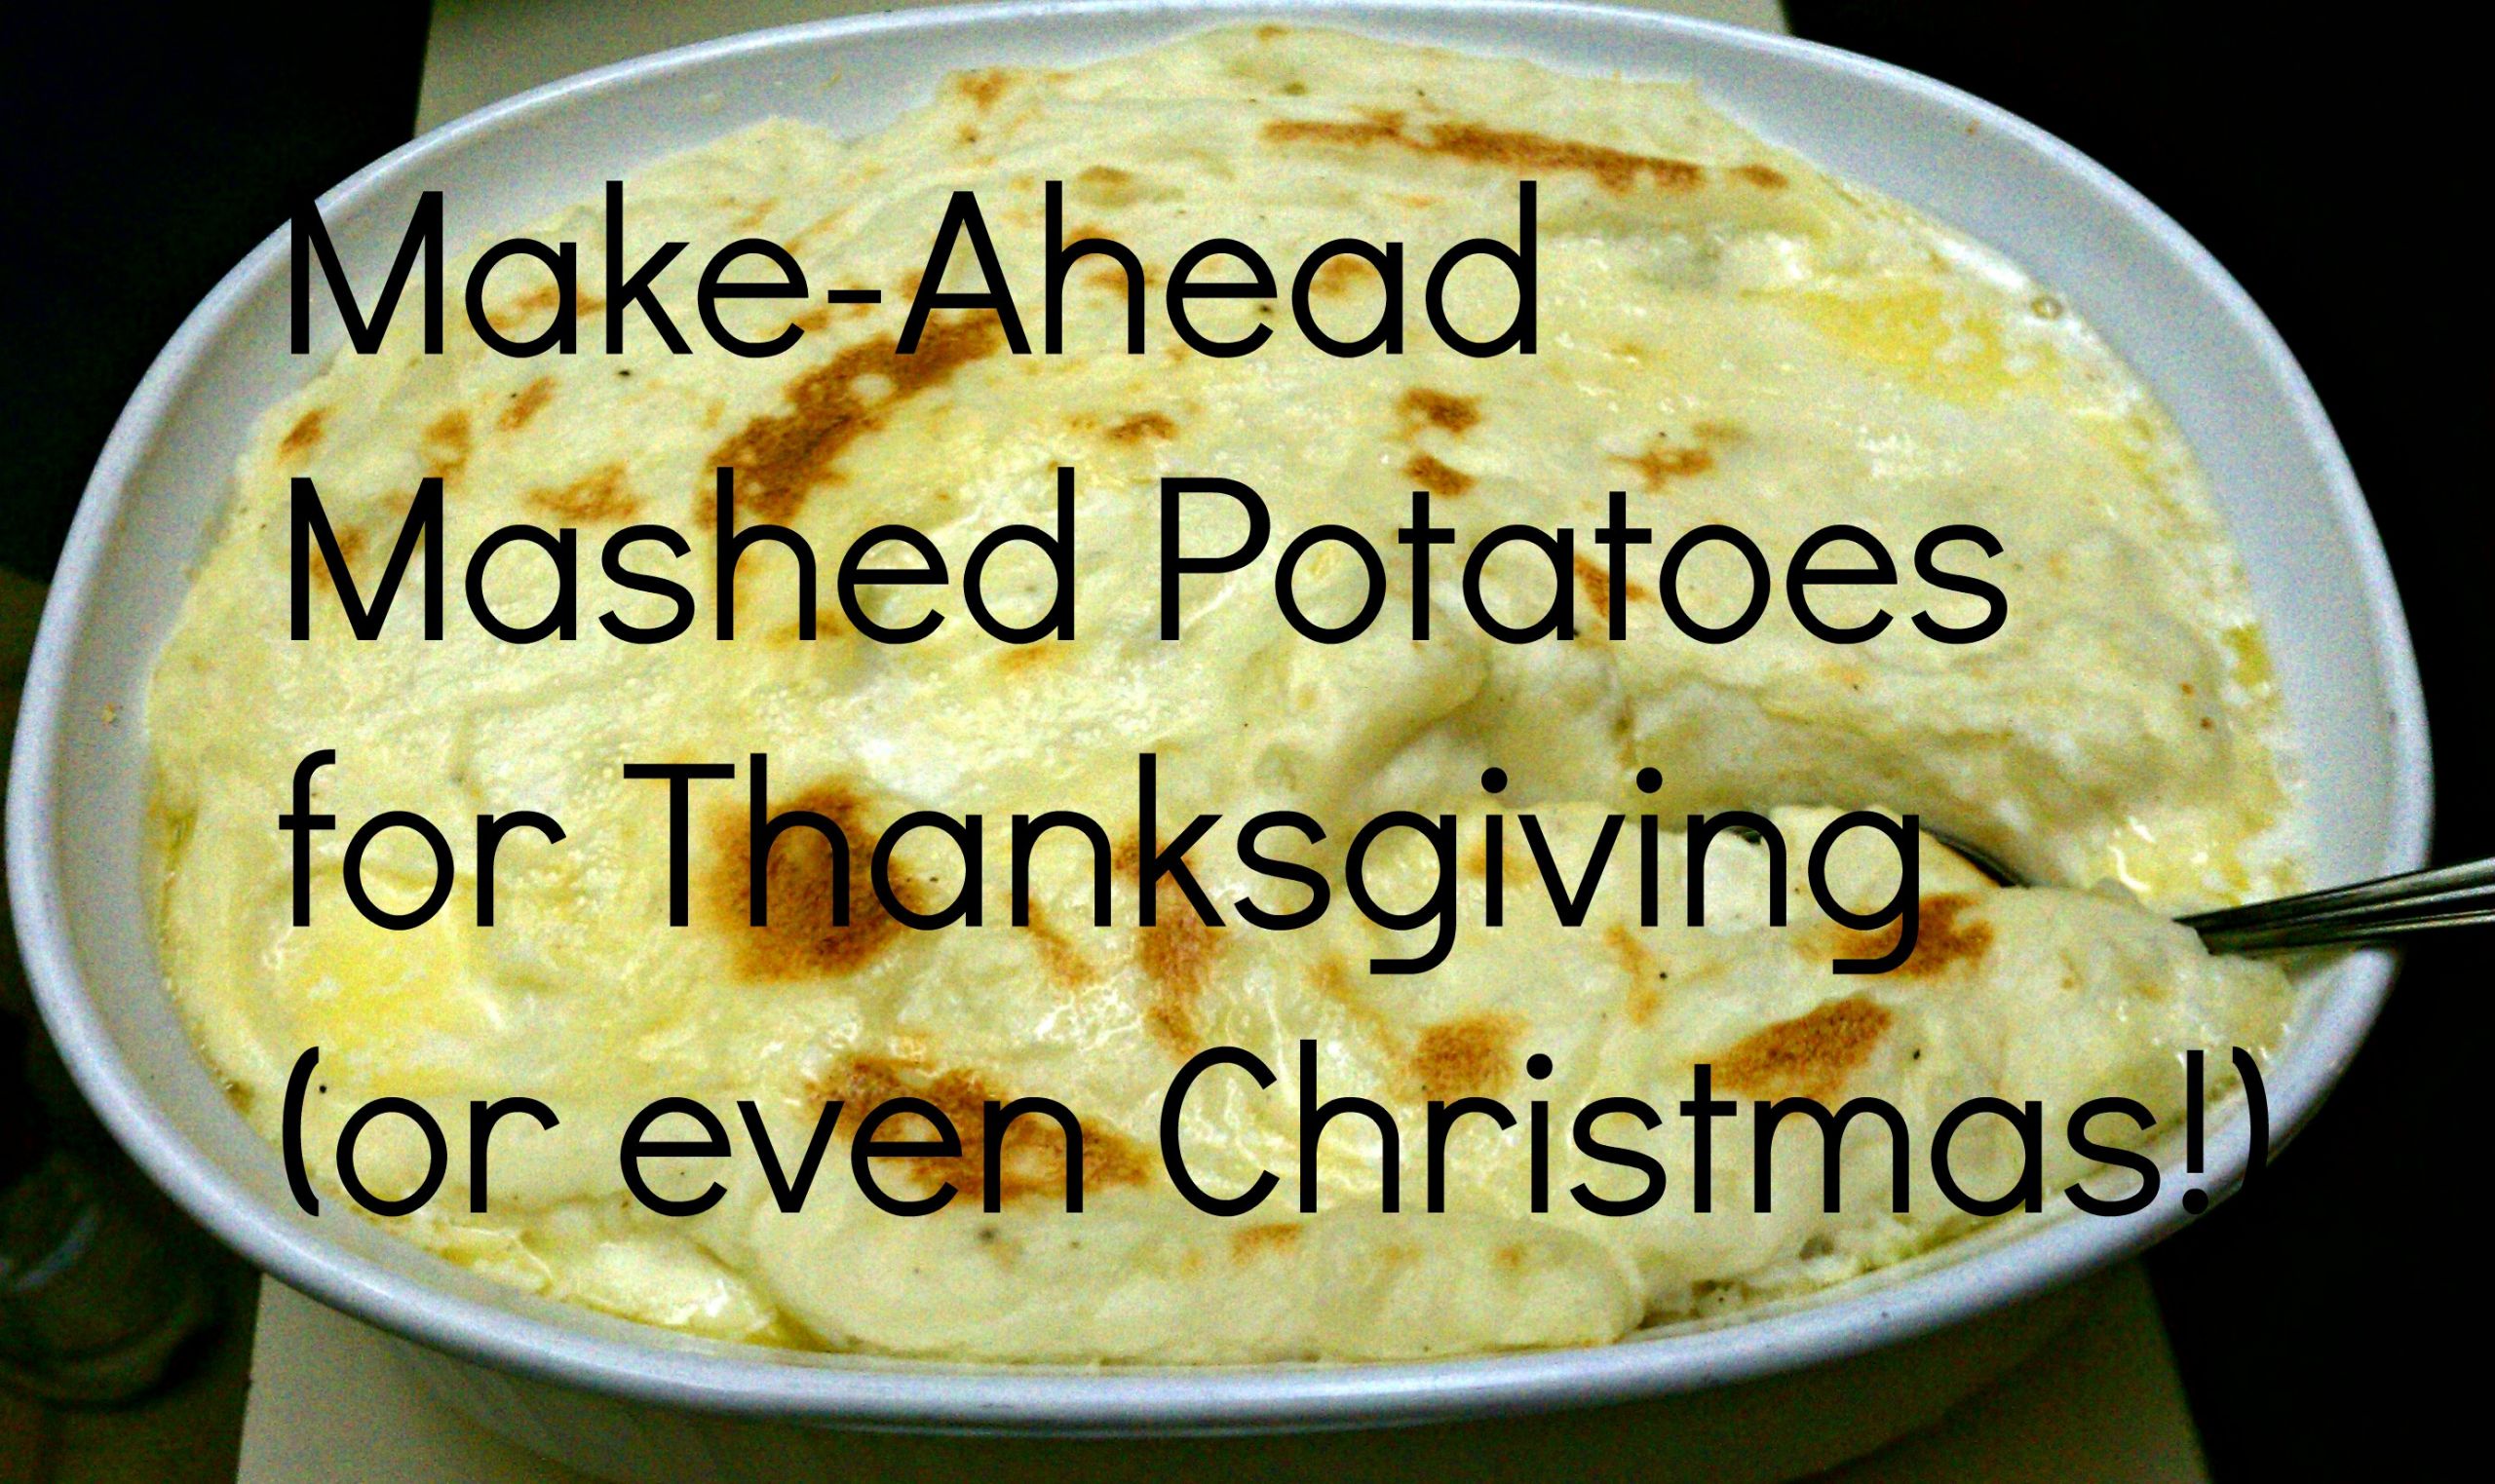 Make Ahead Mashed Potatoes Freezer
 How To Freeze Mashed Potatoes Now For Thanksgiving